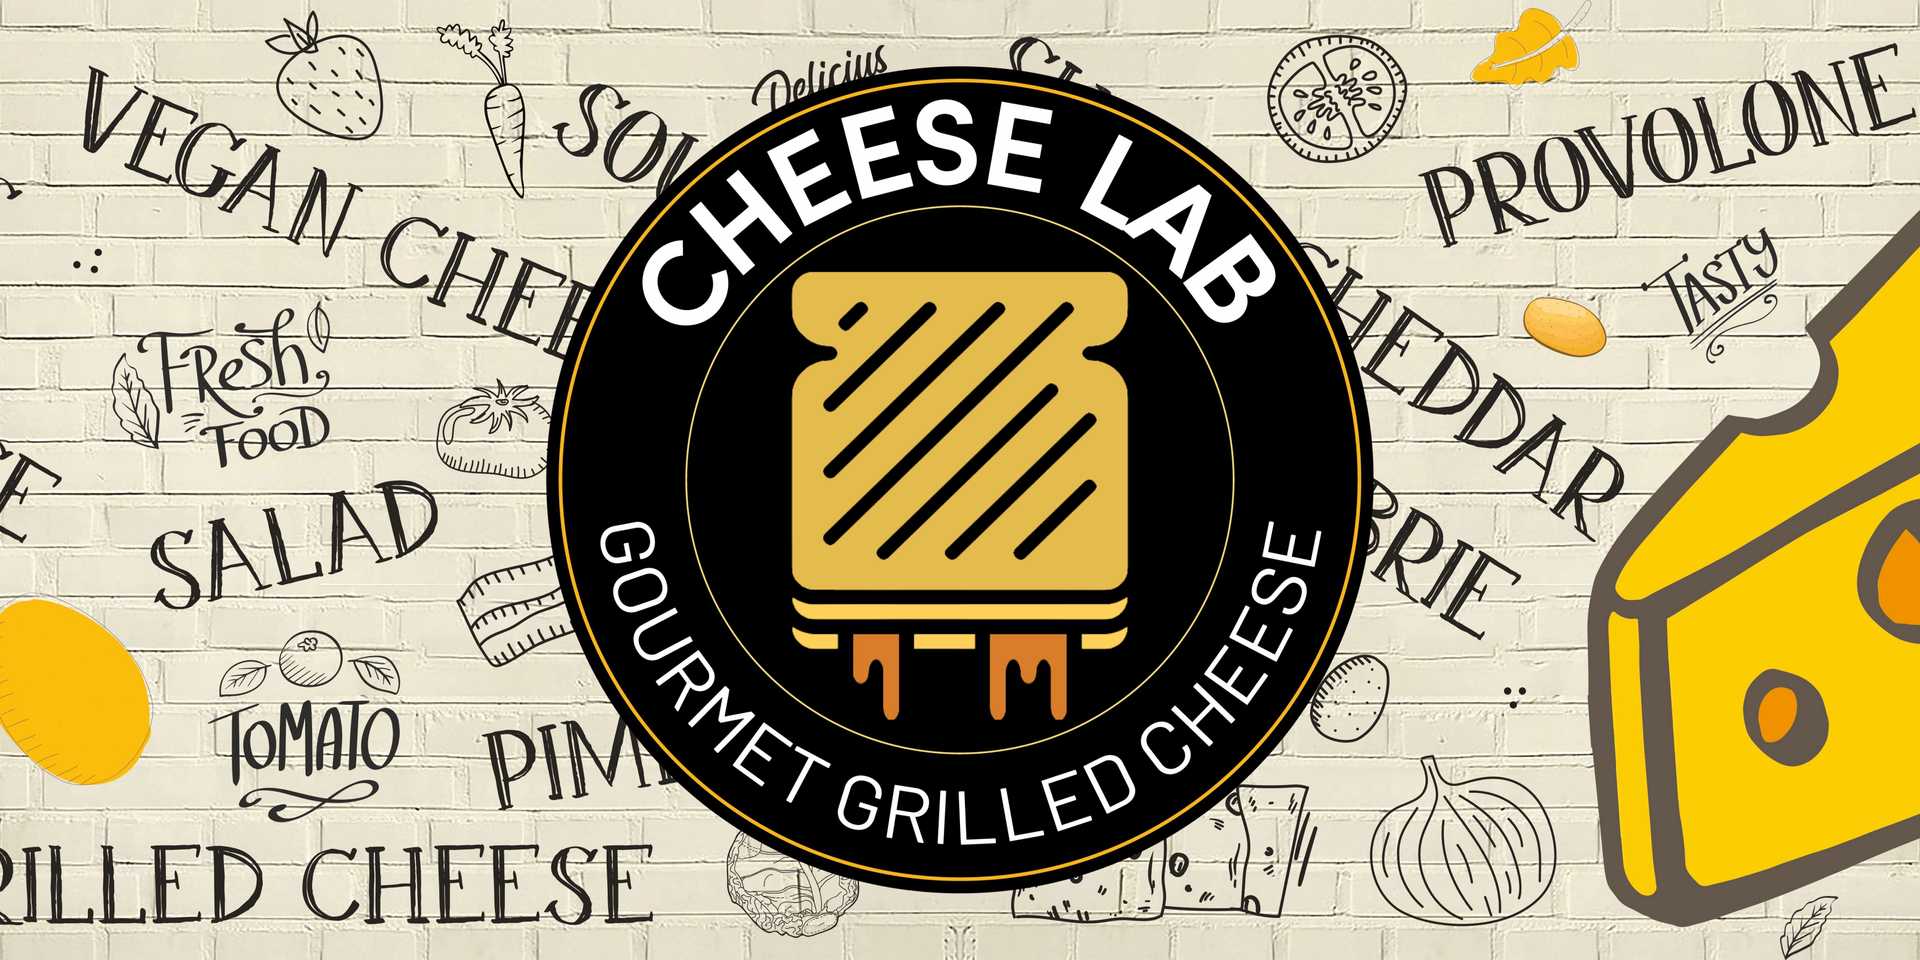 Logo of Cheese Lab featuring grilled cheese sandwich with themed background.